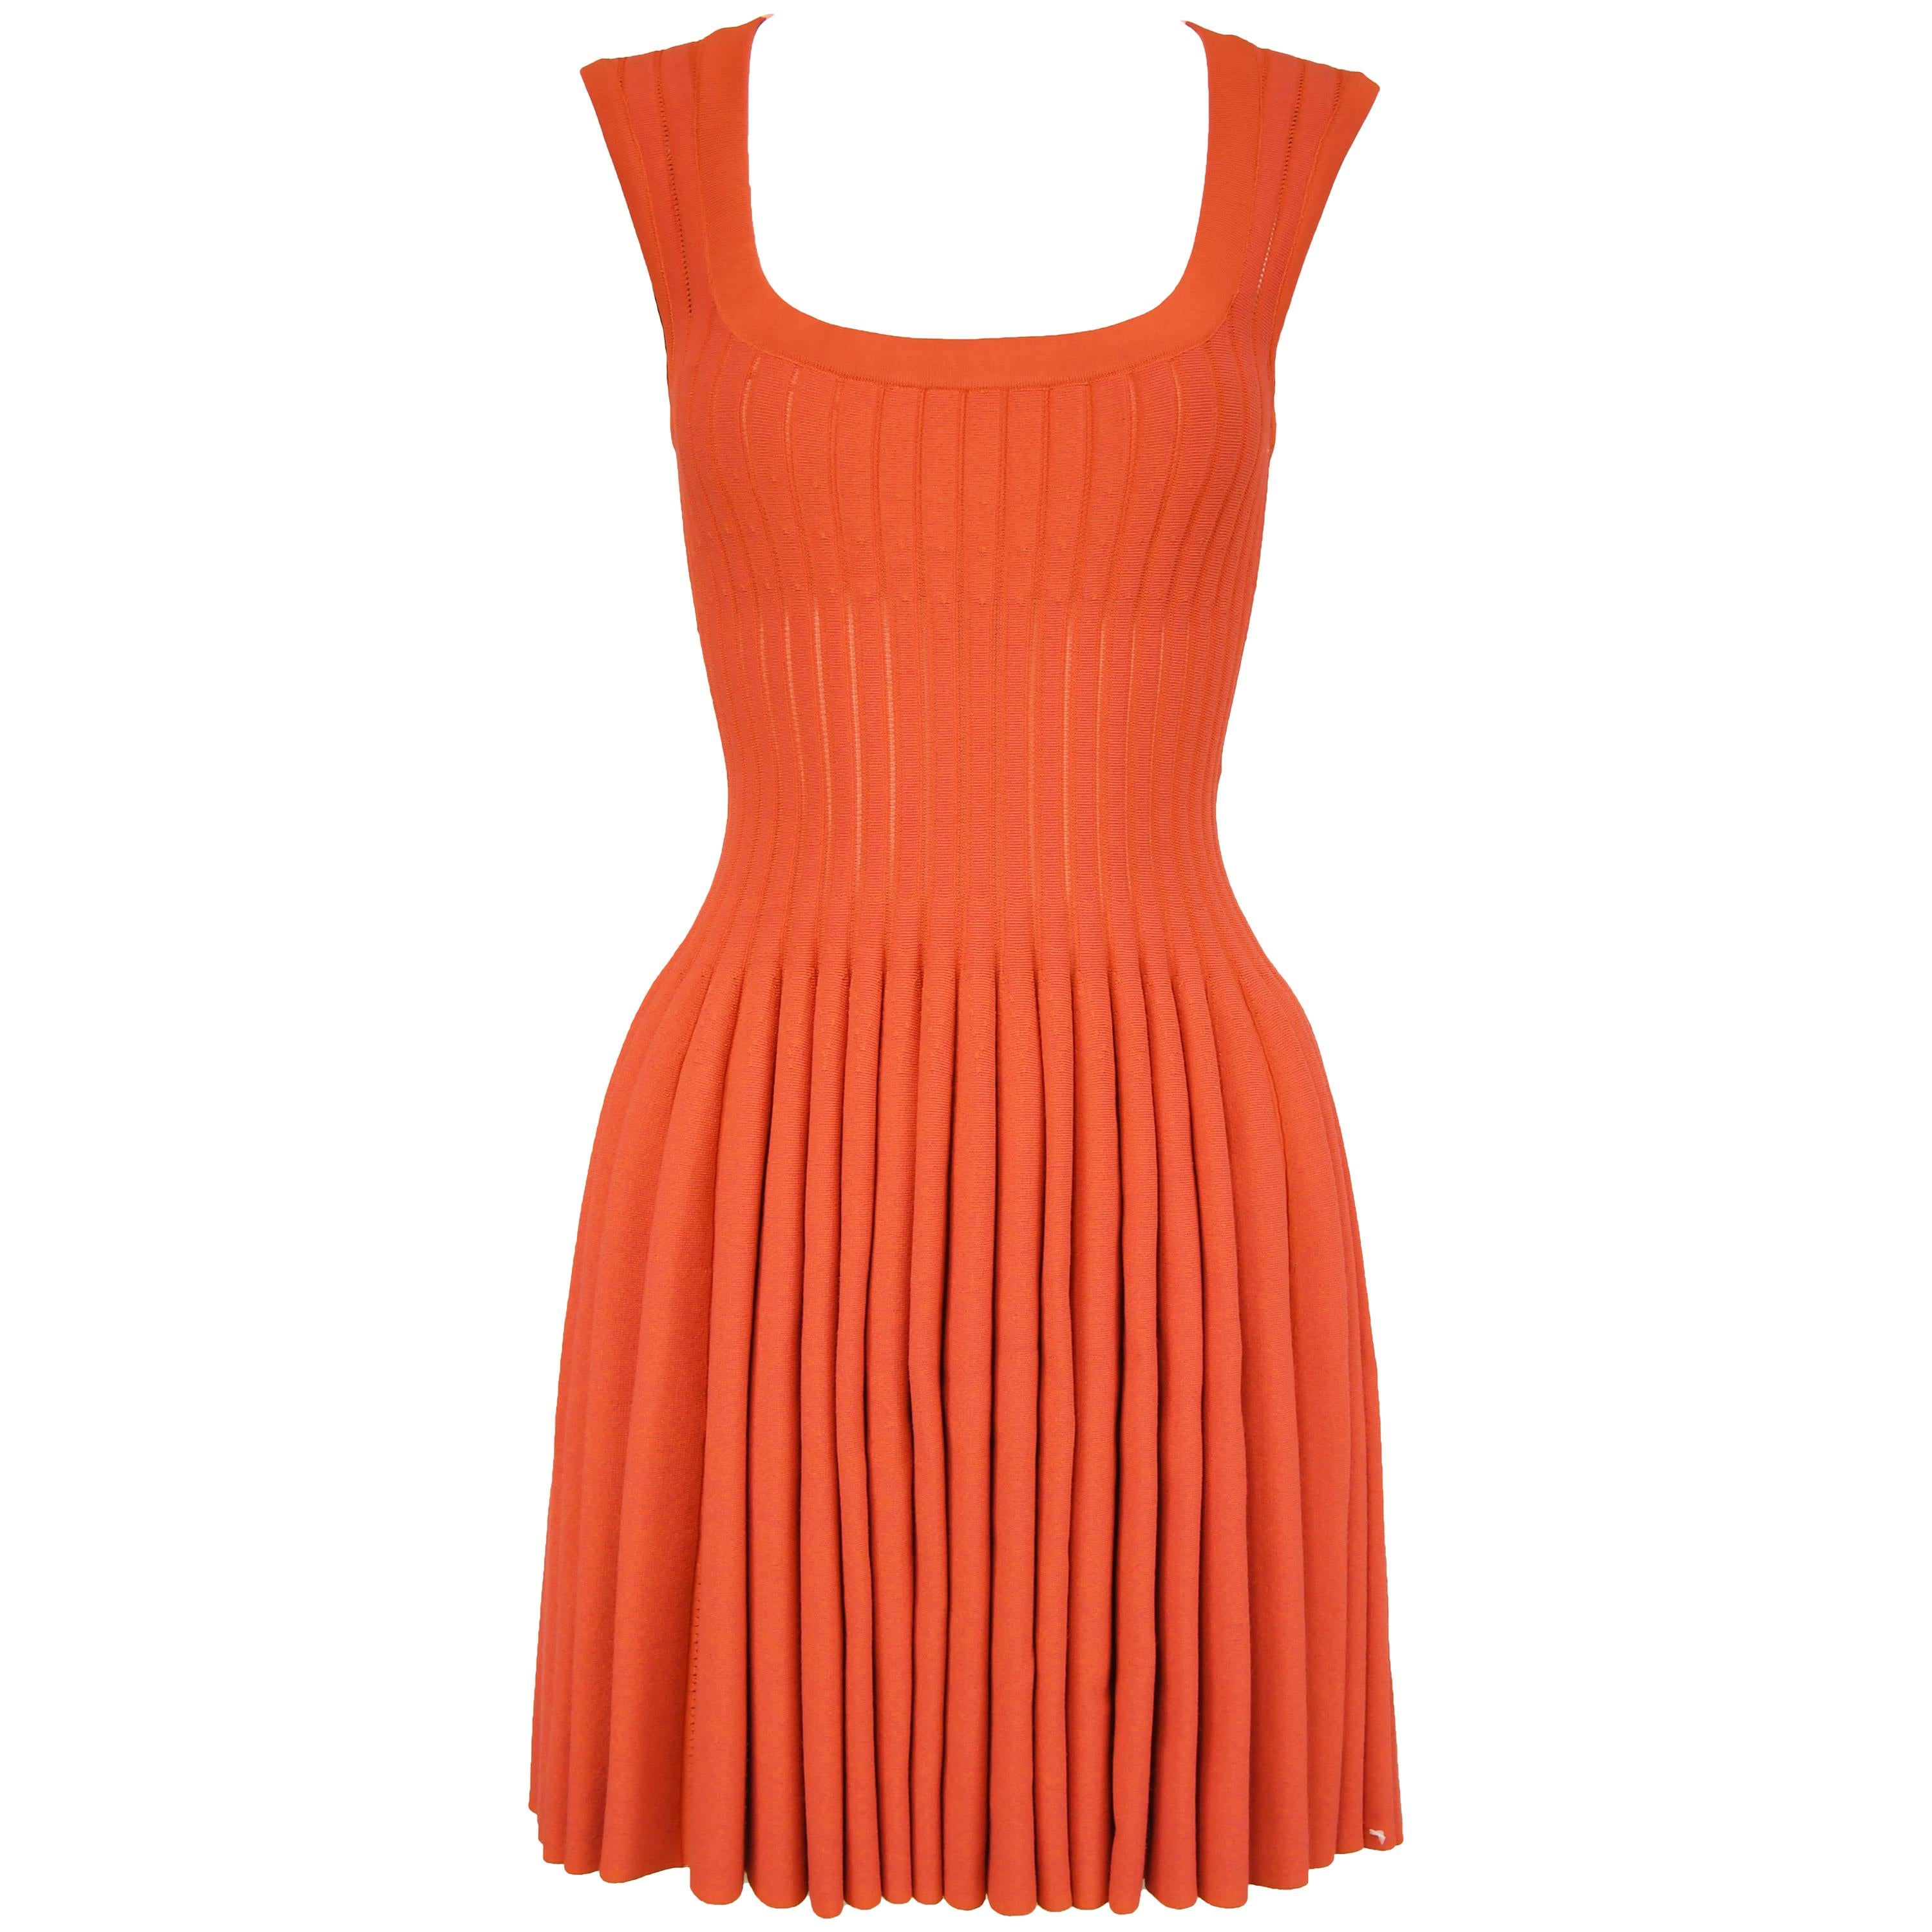 Alaia Dark Coral Fit & Flare Dress - Size FR 38 For Sale